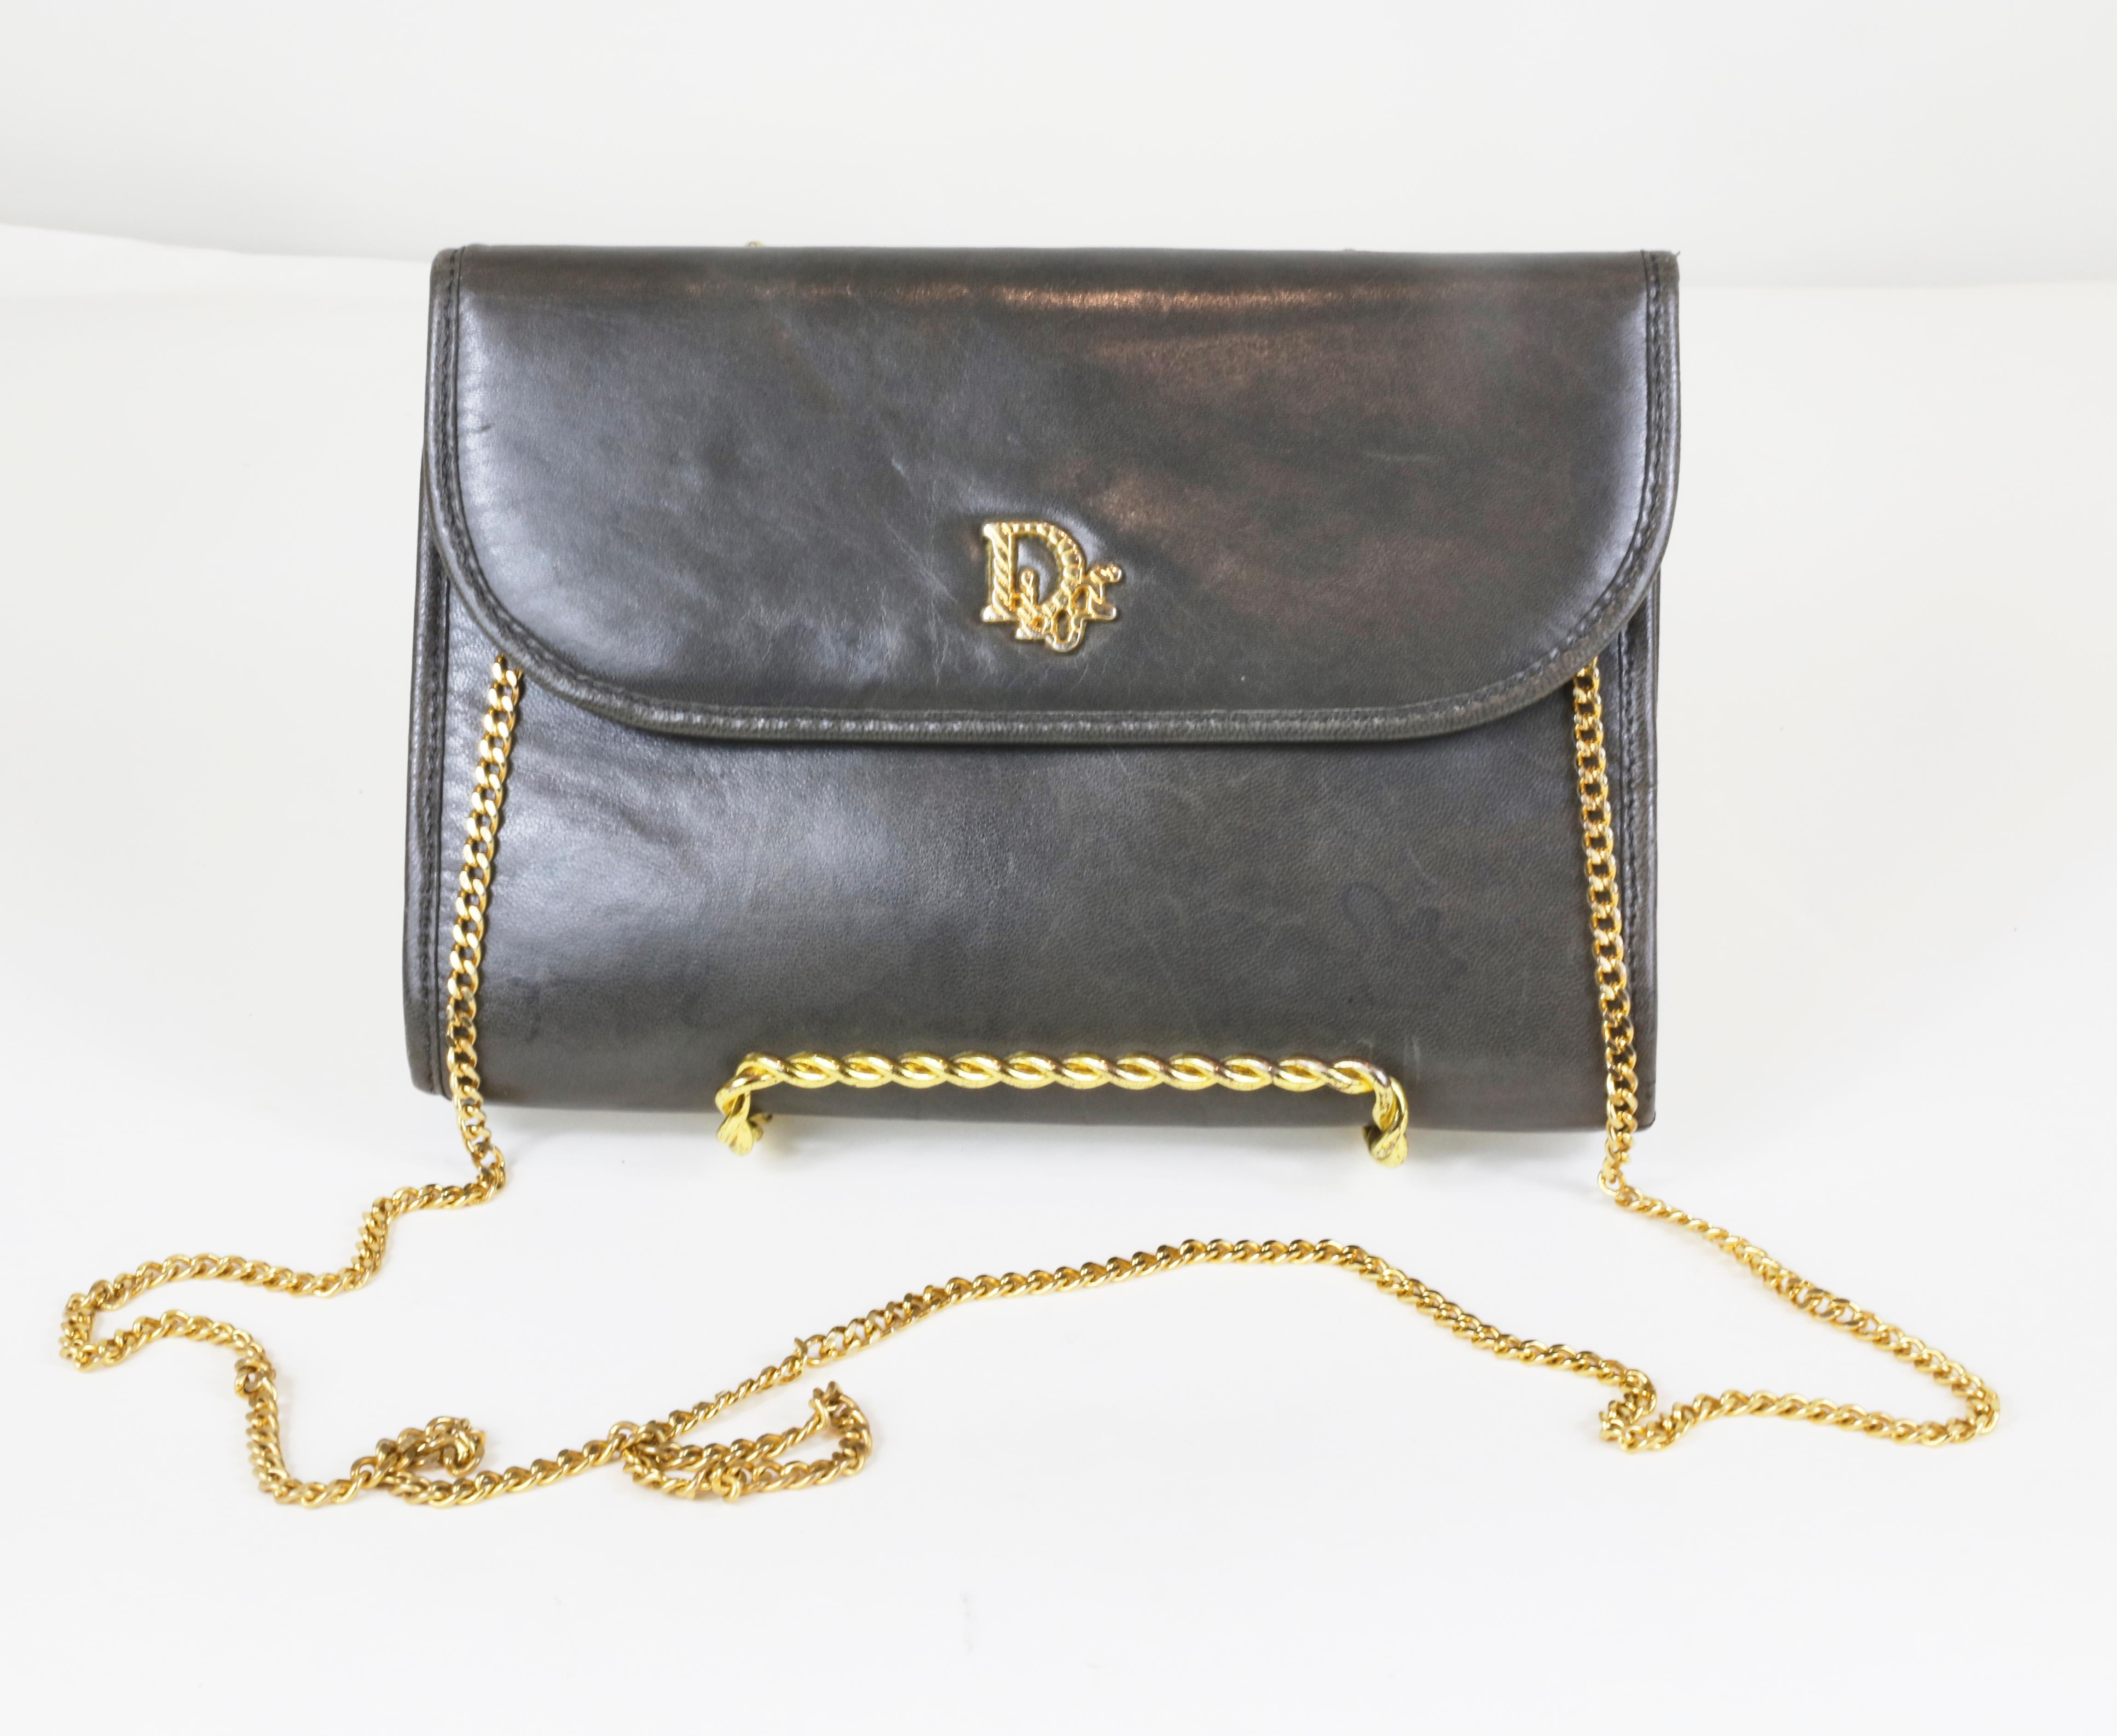 Christian Dior Grey Leather Clutch with Chain
Small Clutch with Chain Strap and Main Compartment
